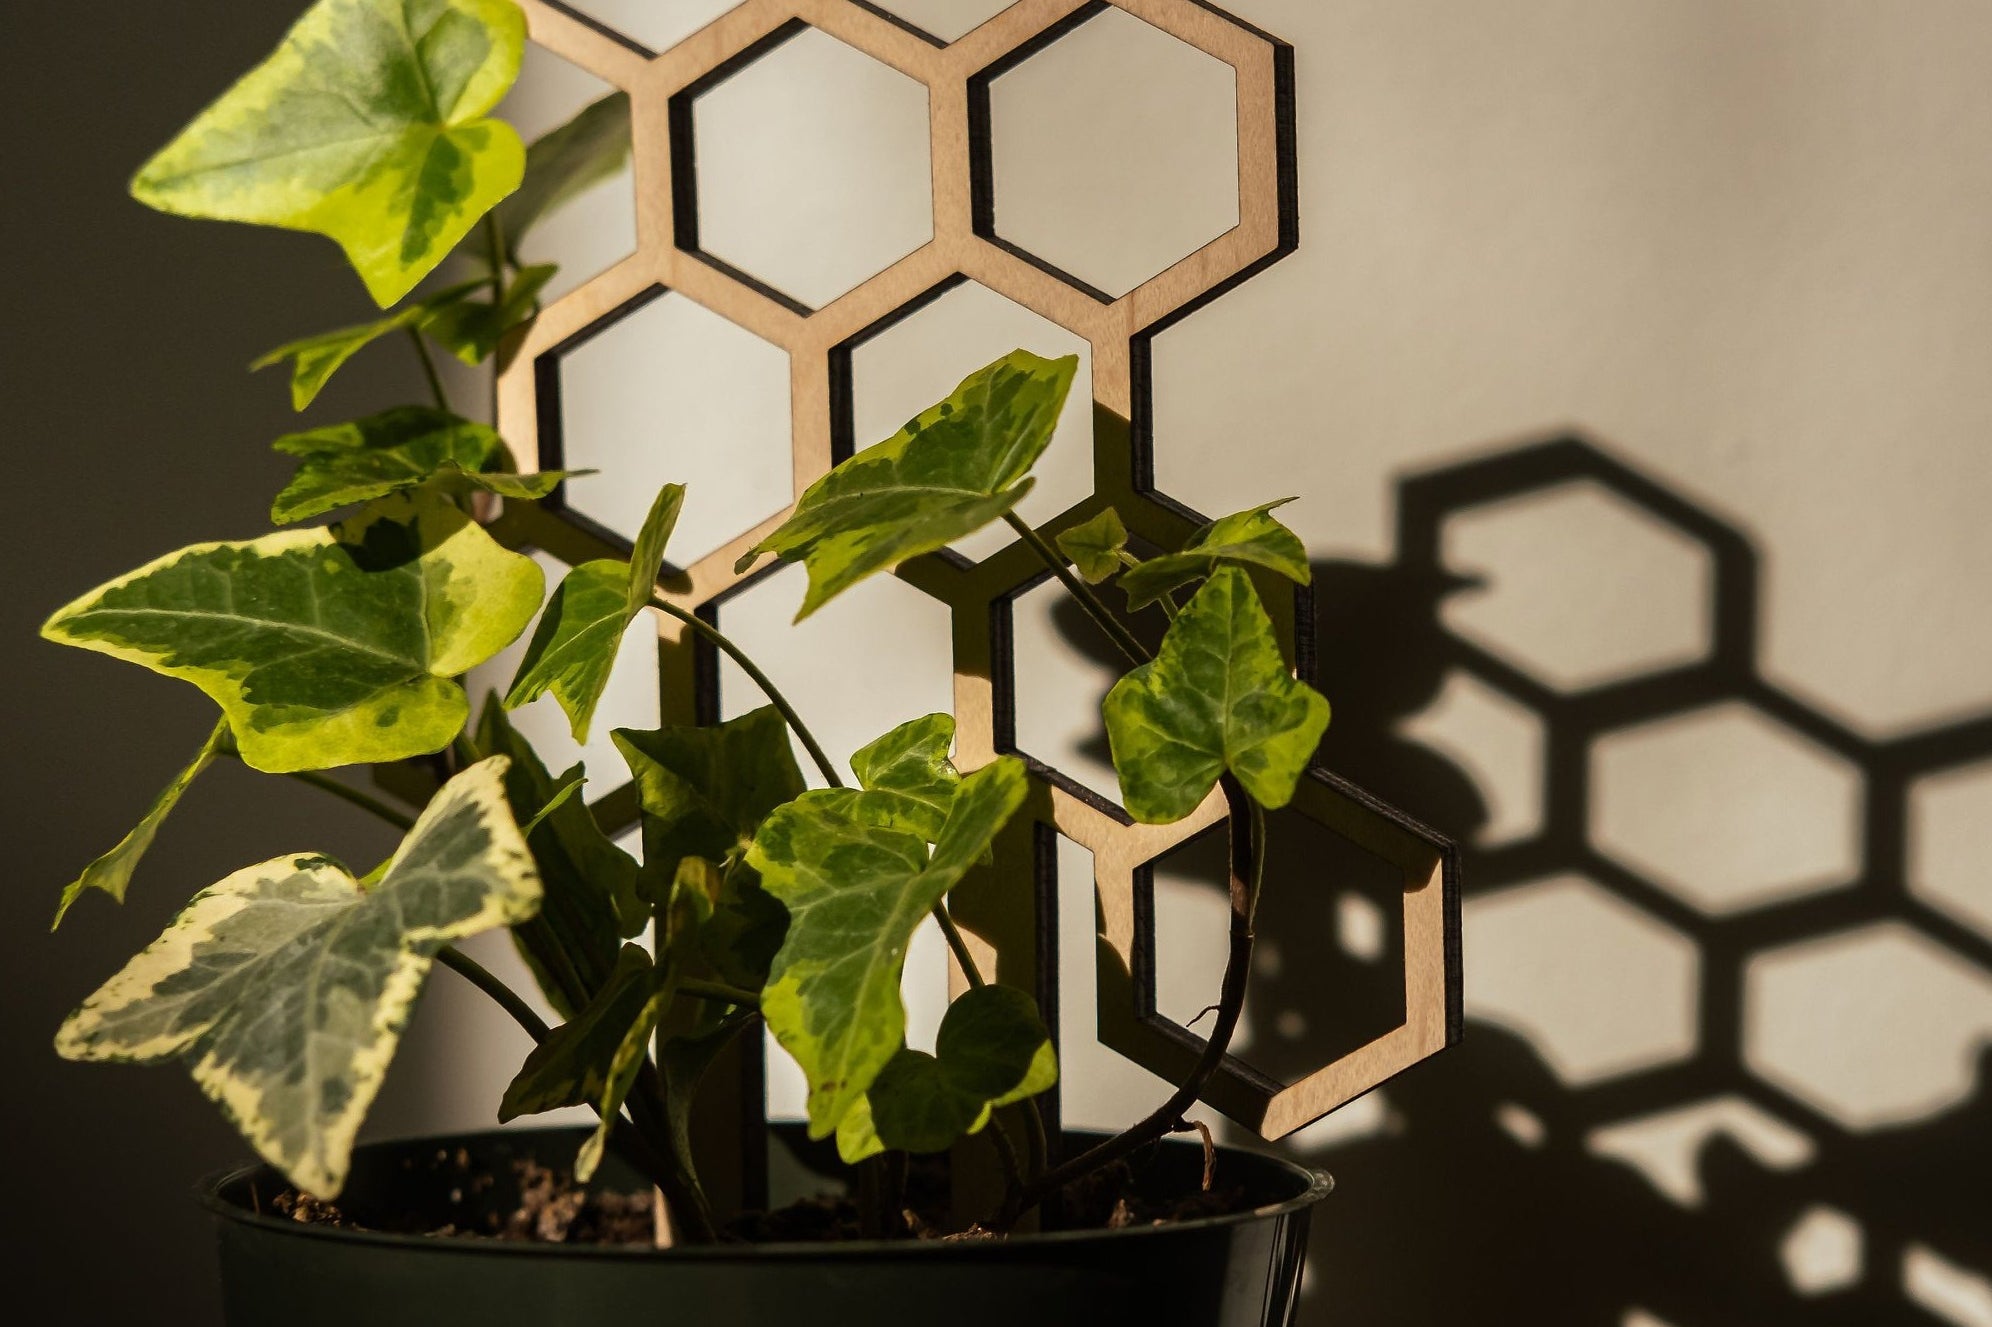 Small honeycomb plant trellis in an ivy plant